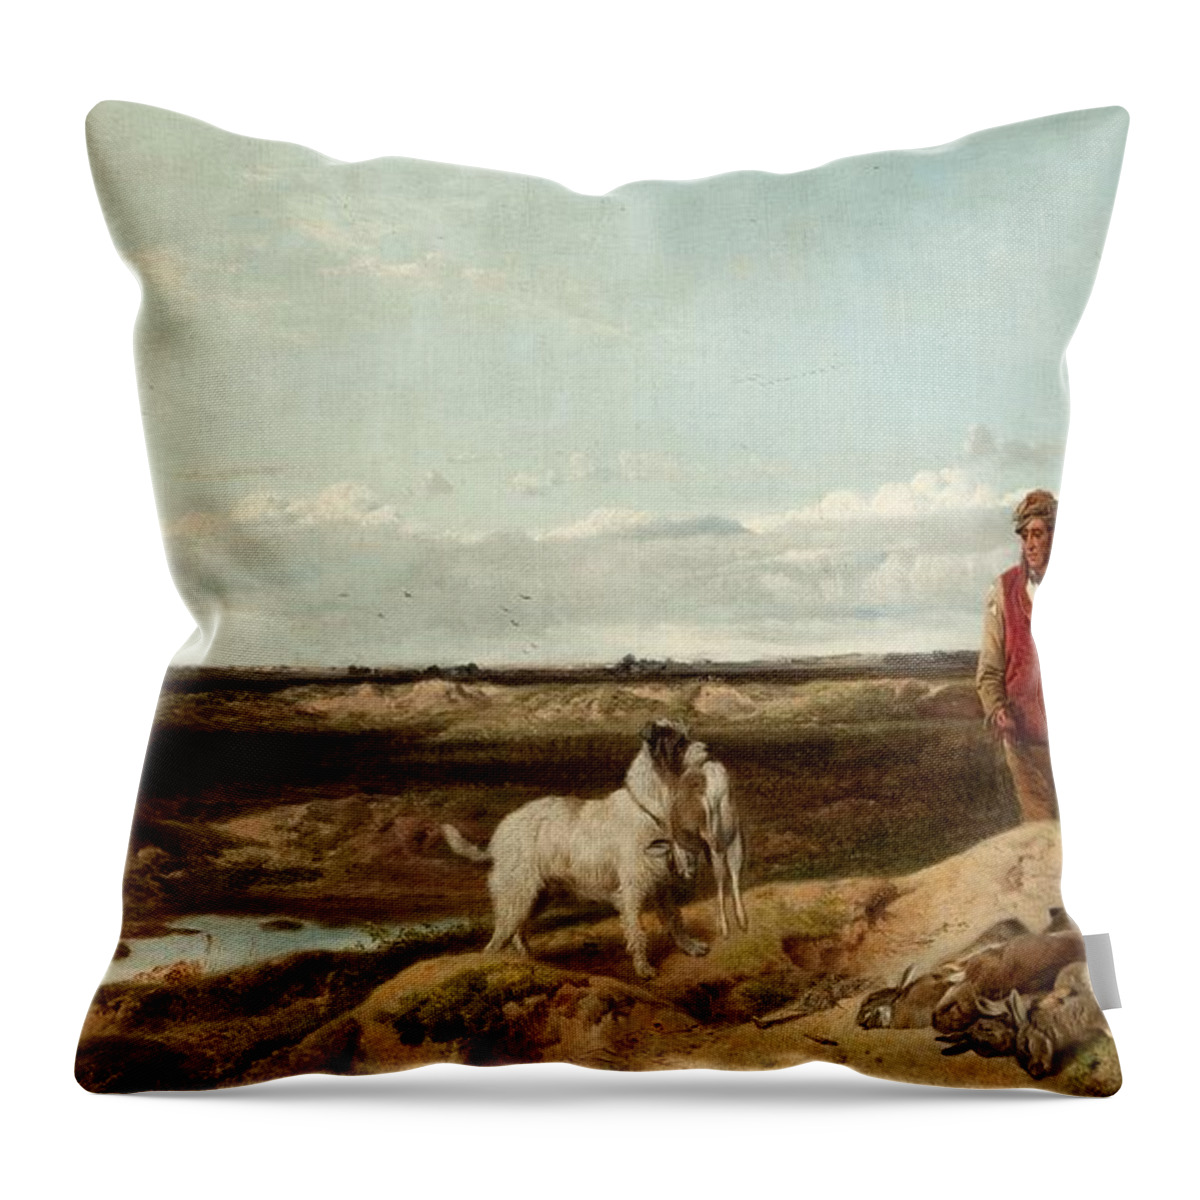 Ferreting Throw Pillow featuring the painting Ferreting by Richard Ansdell